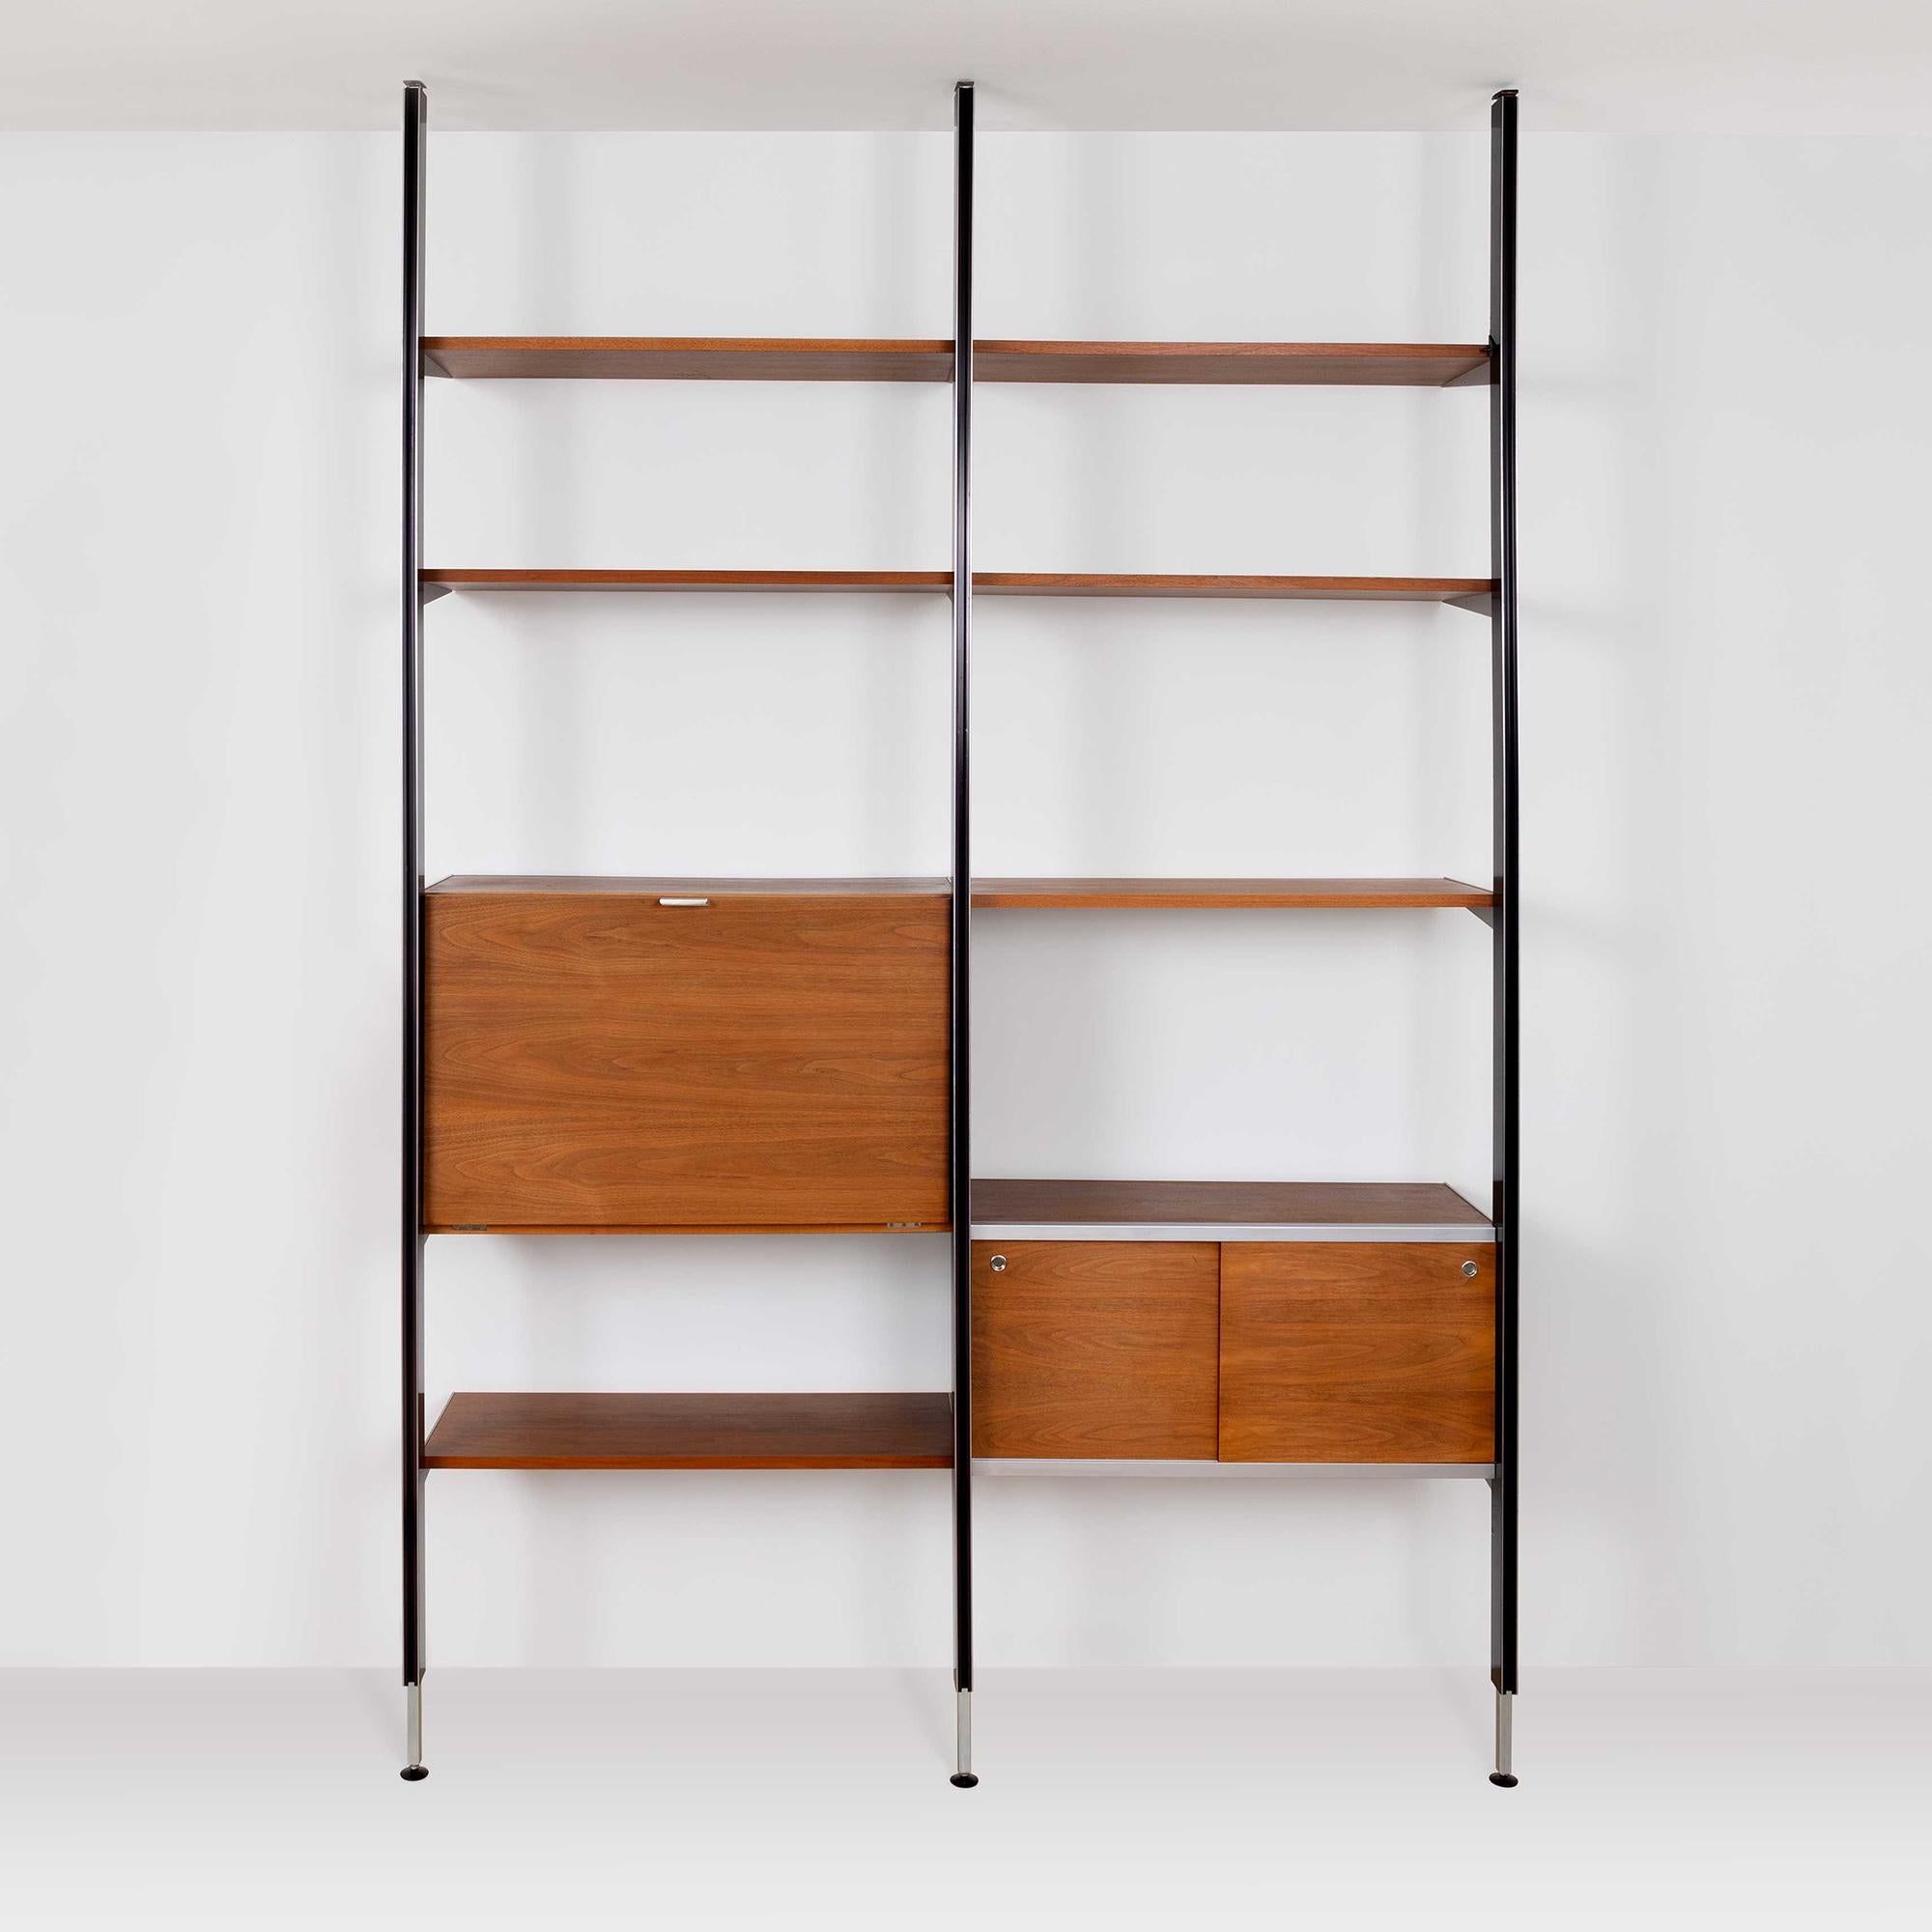 Herman Miller introduced George Nelson’s Comprehensive Storage System (CSS) in 1959 and produced it until 1973. Available in various wood finishes, the CSS could also be customized to fit customers' needs, thanks to its modular units that included